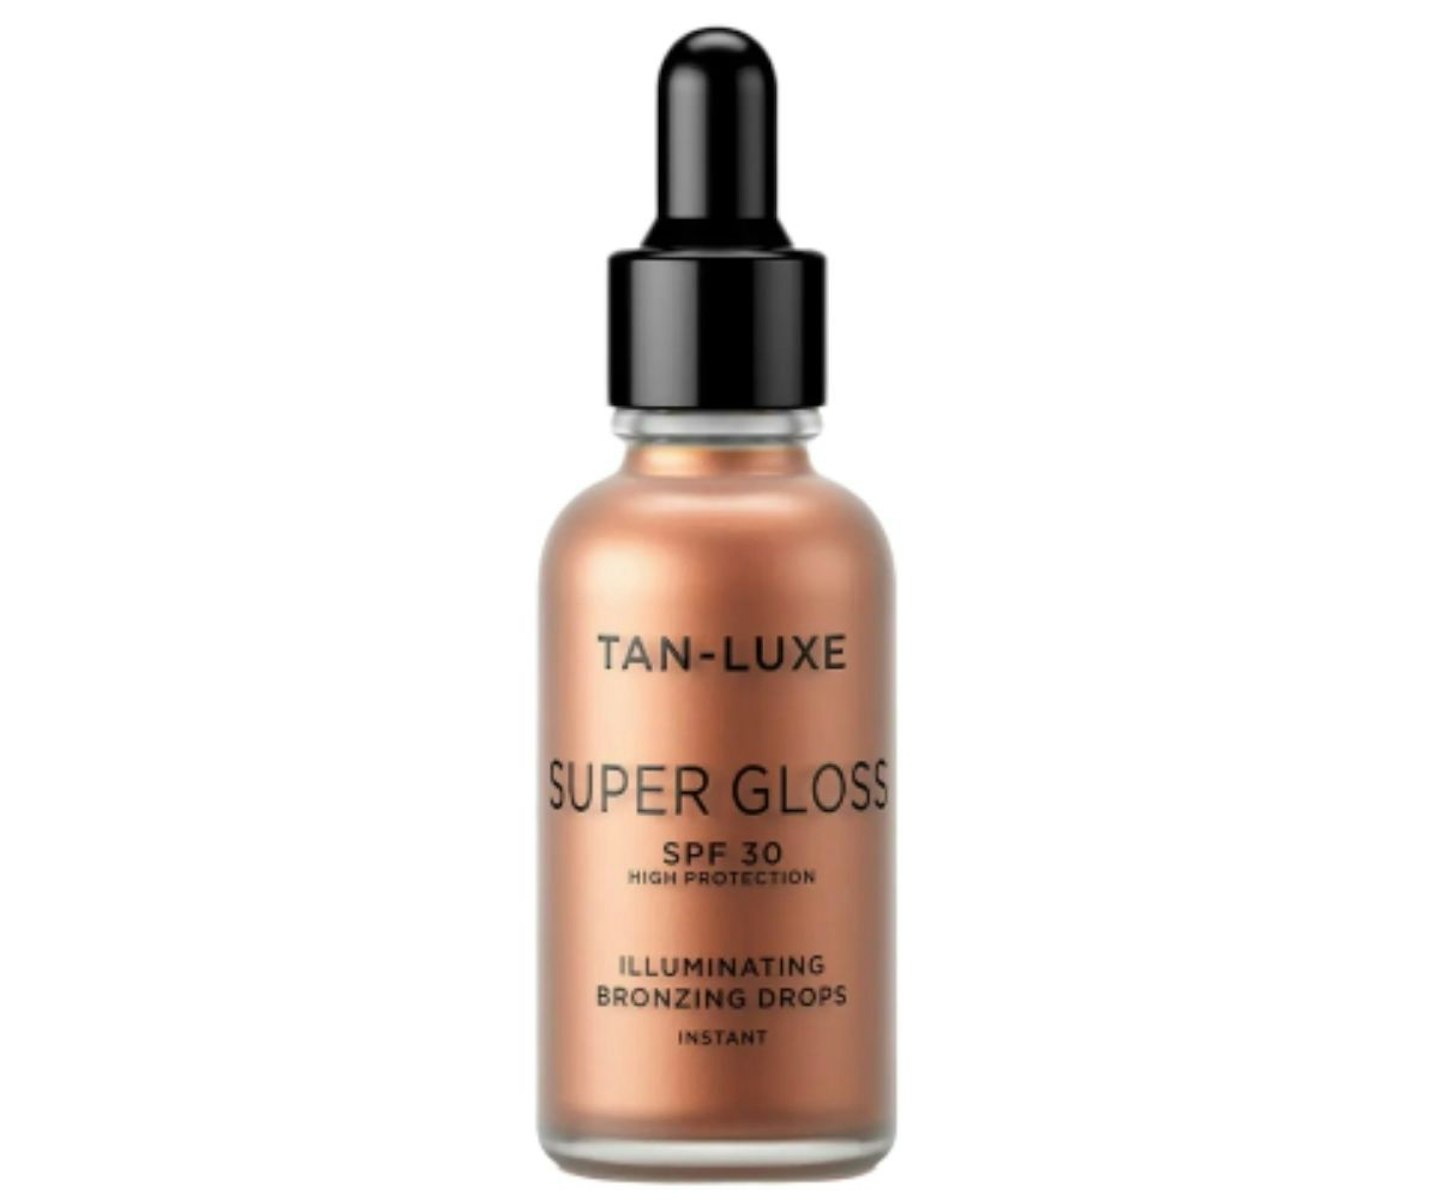 A picture of the Tan Luxe Super Gloss